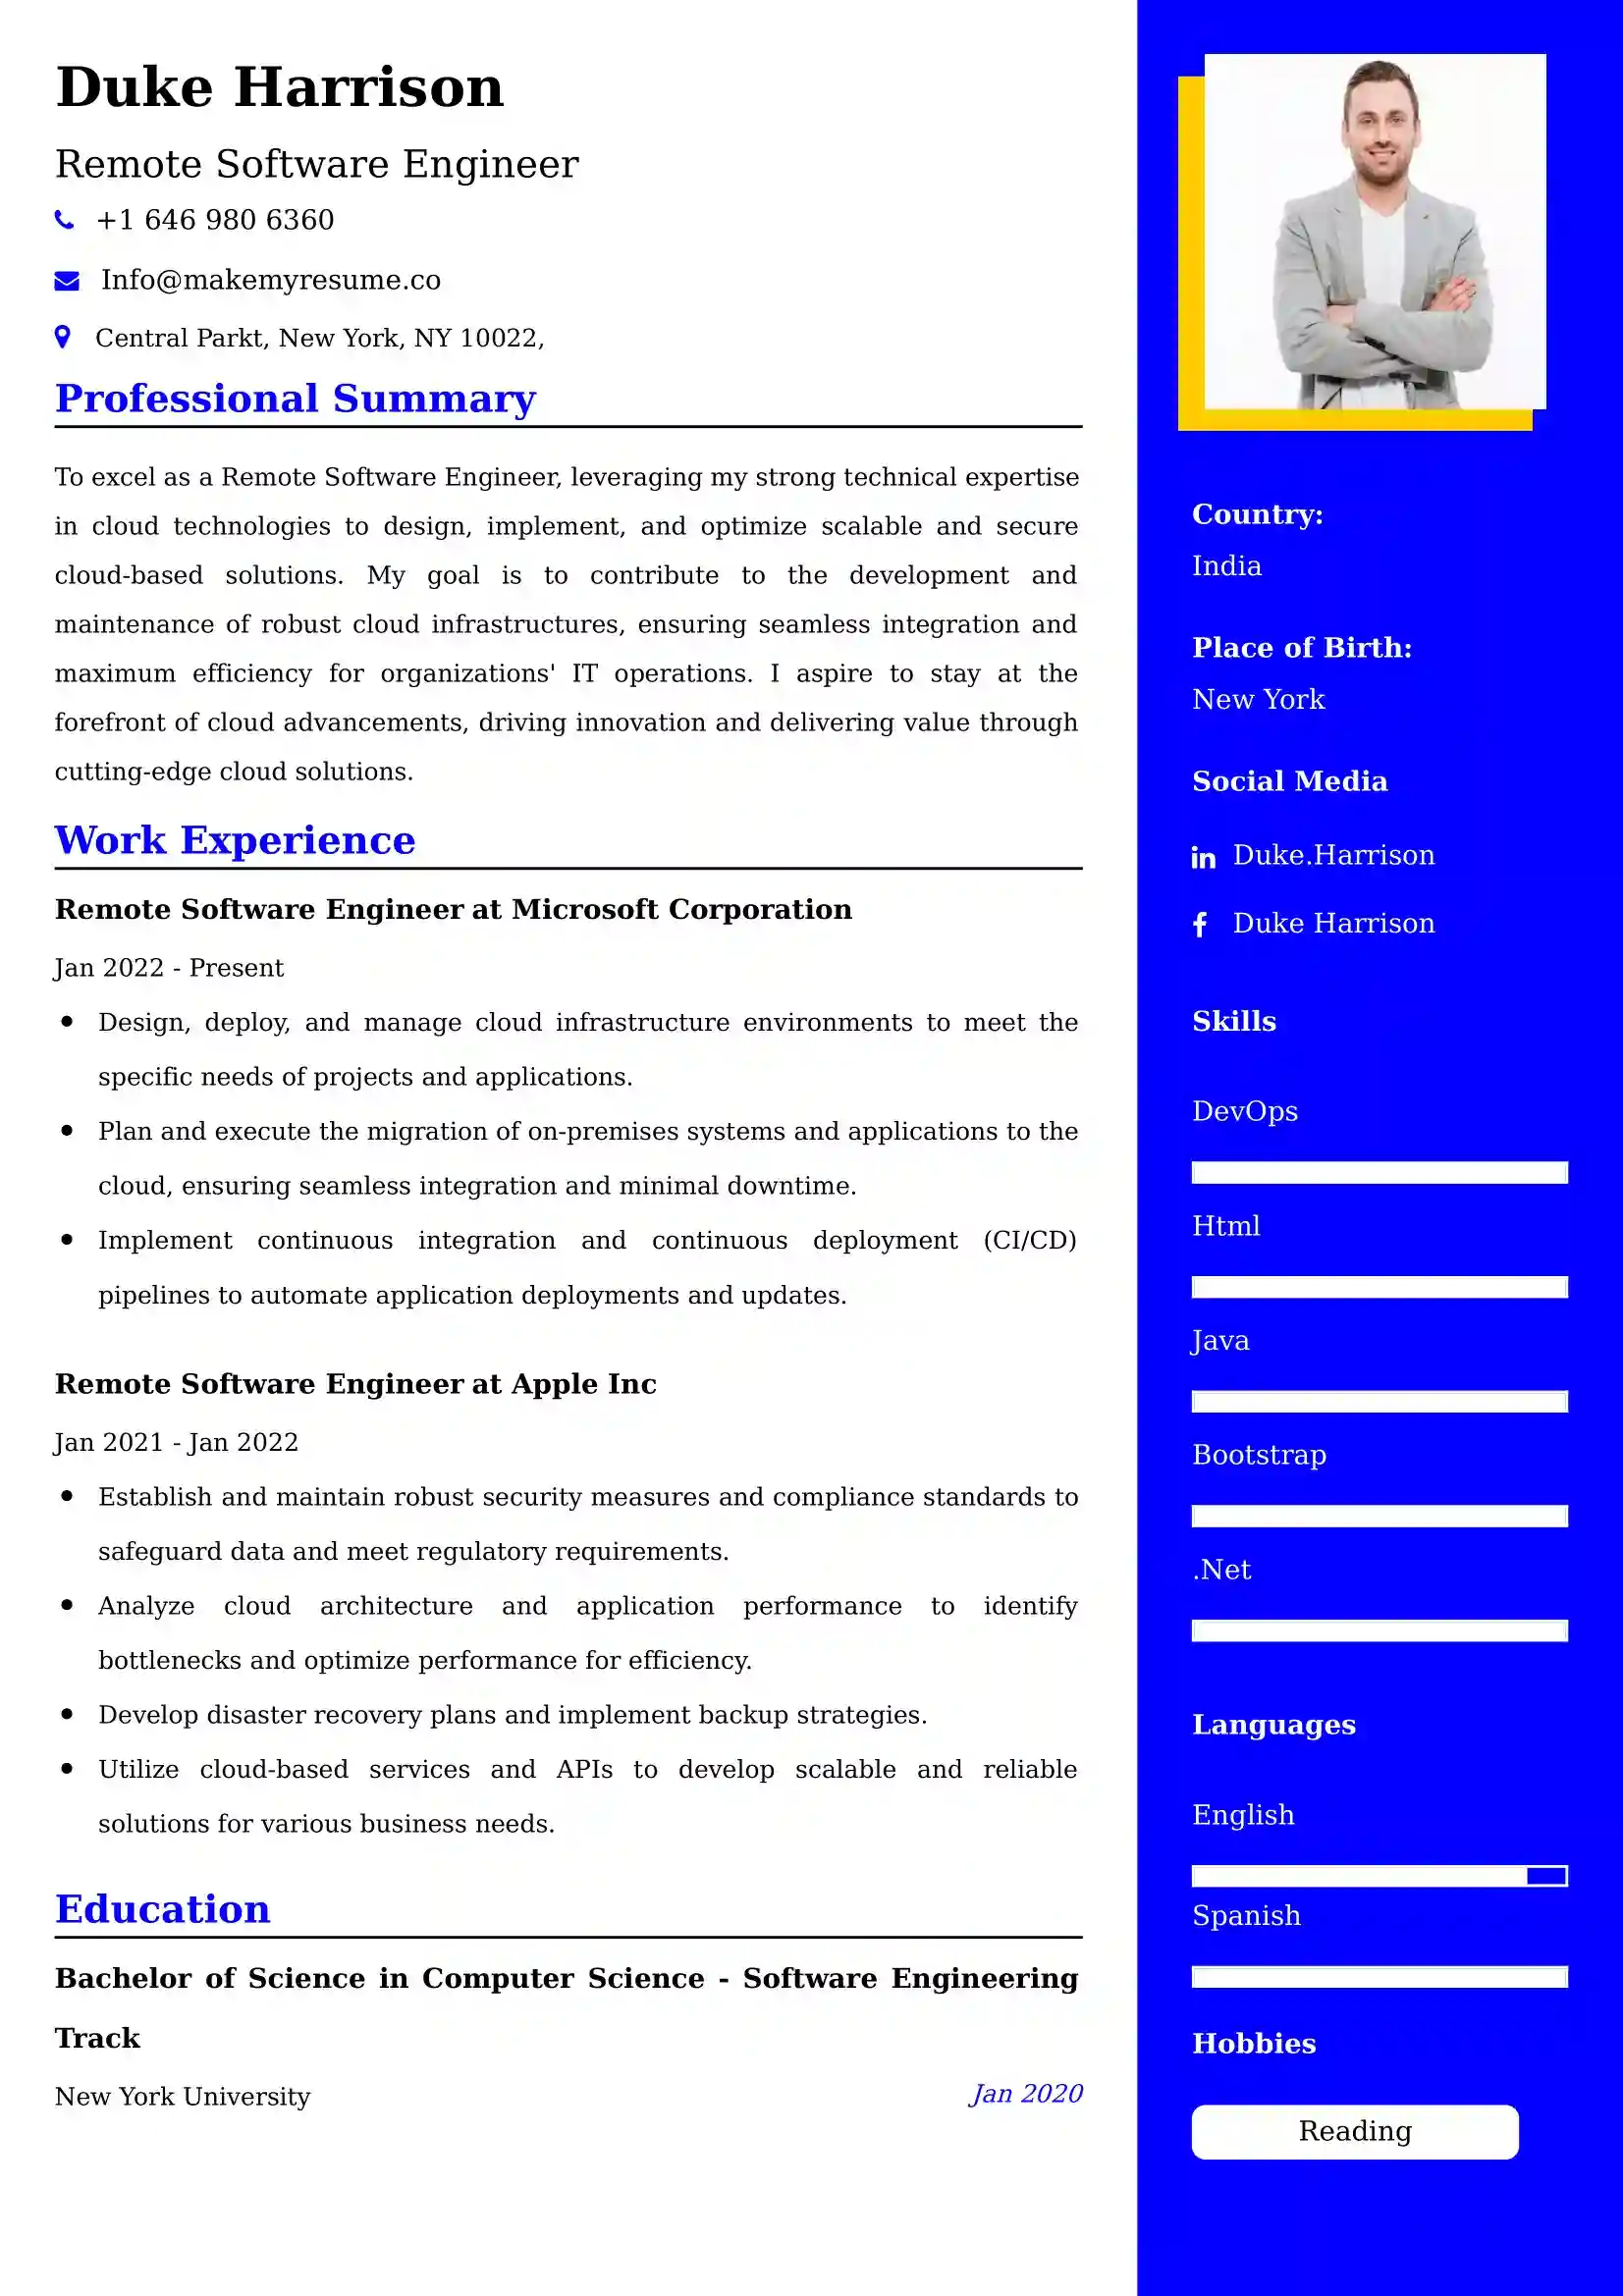 Remote Software Engineer Resume Examples - UK Format, Latest Template.